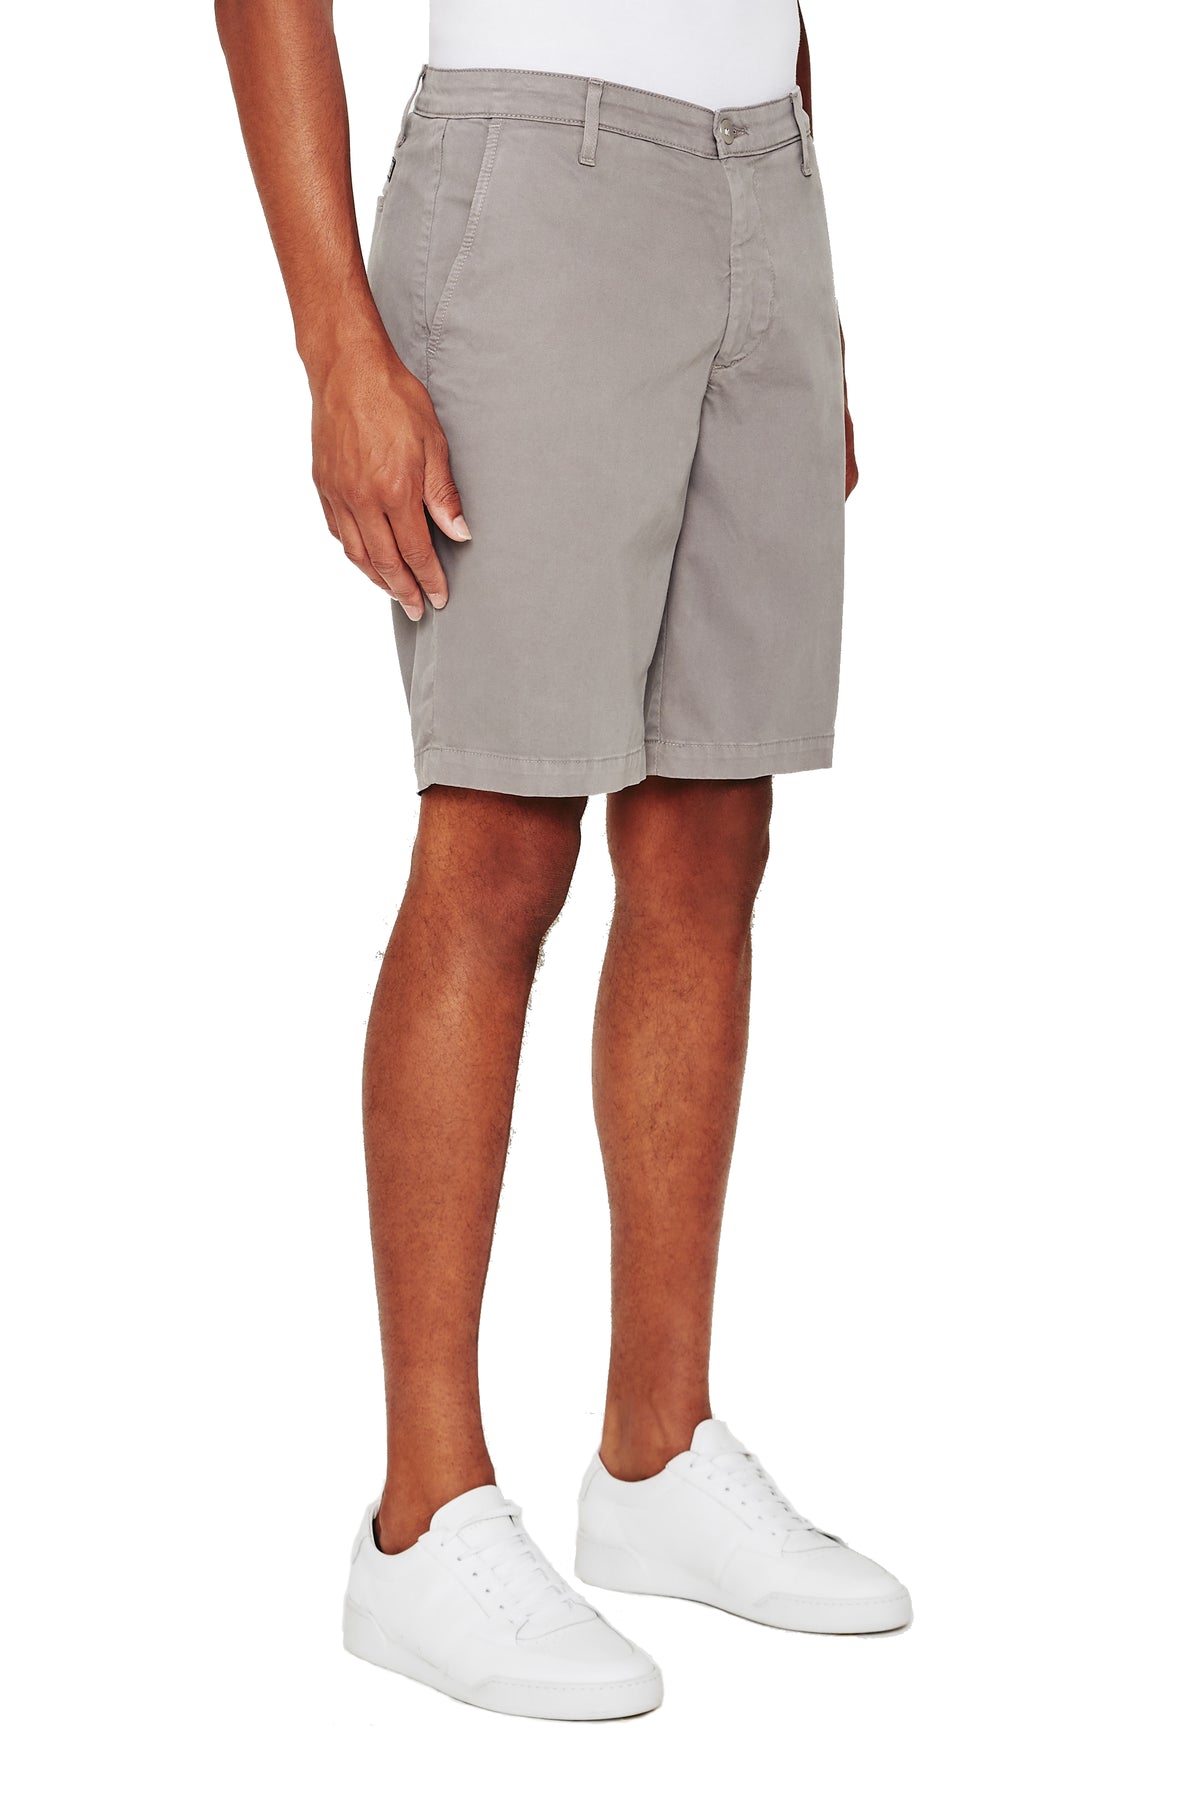 AG Adriano Goldschmied Griffin Lightweight Stretch Sateen Shorts